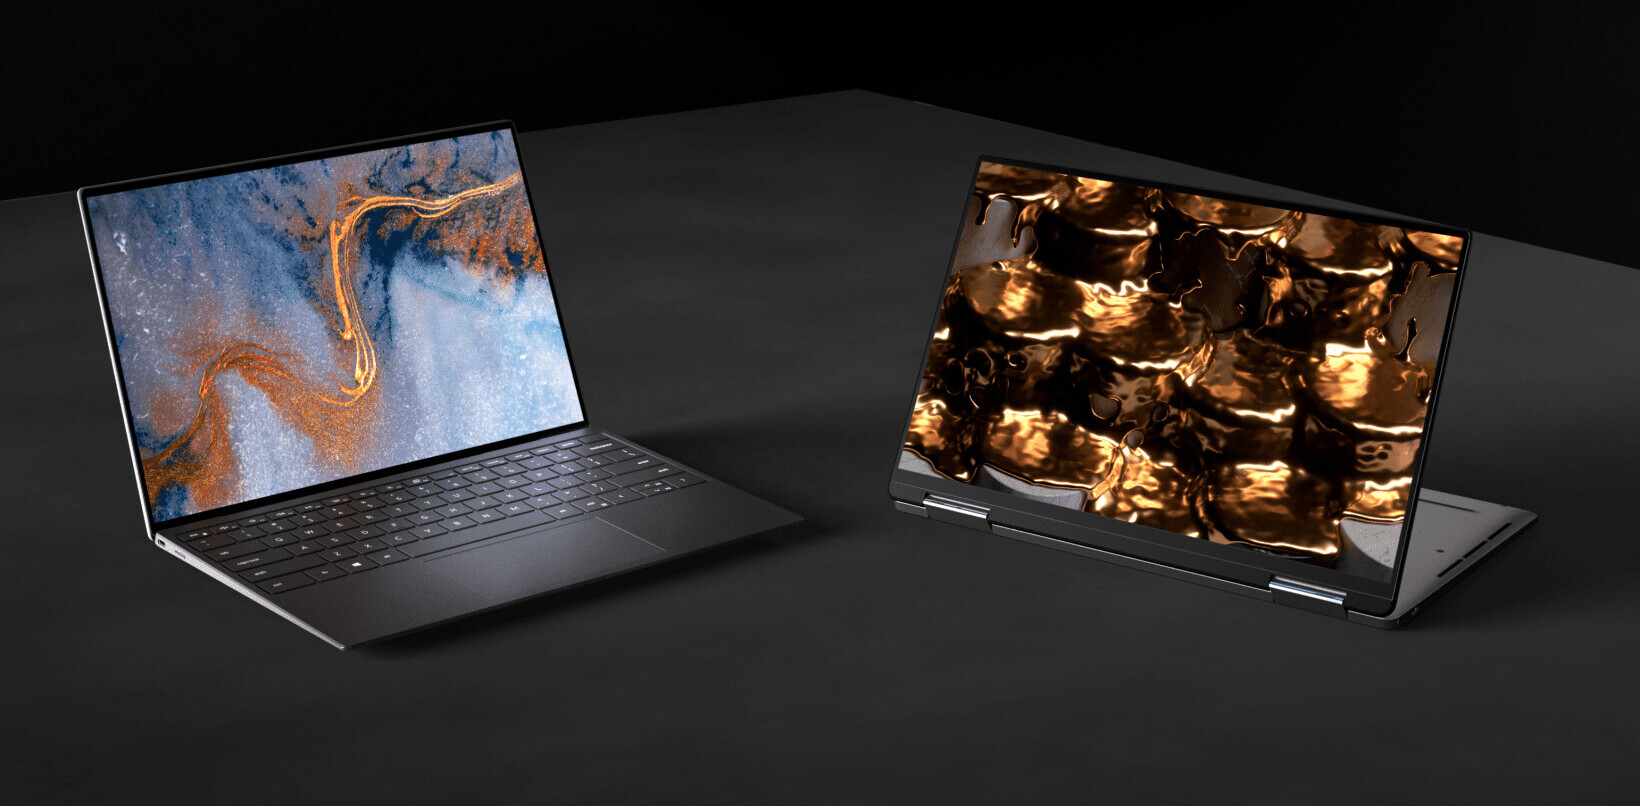 Dell’s XPS 13 family gets a big performance update with Intel’s 11th-gen chips